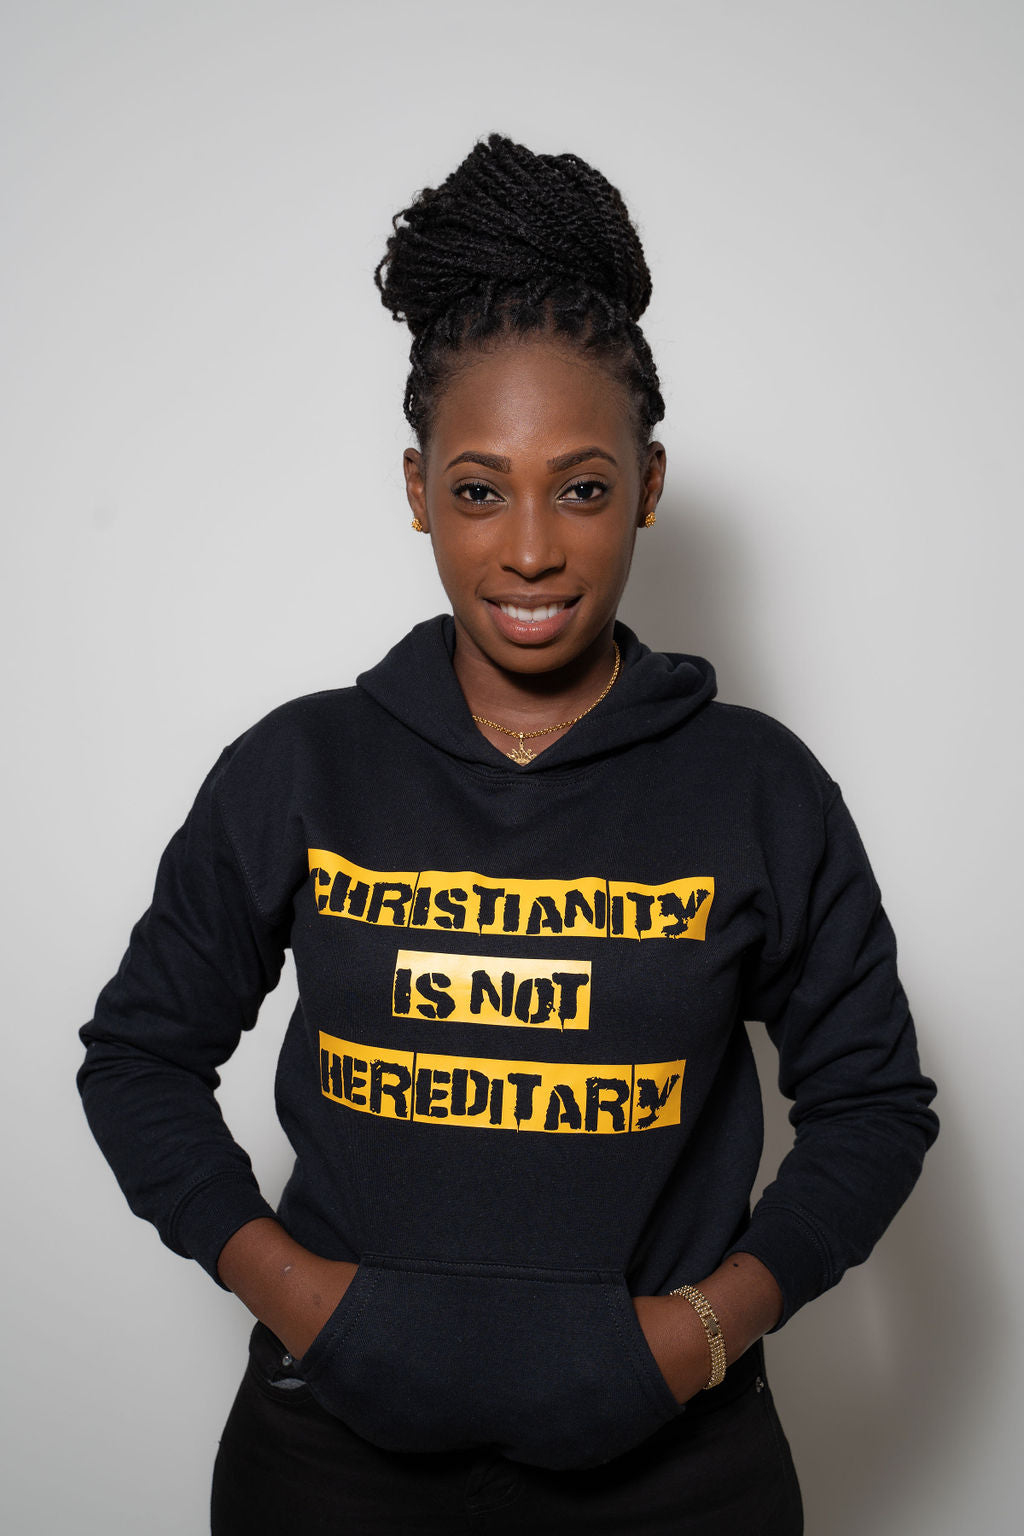 CHRISTIANITY IS NOT HEREDITARY HOODIE Black and Yellow